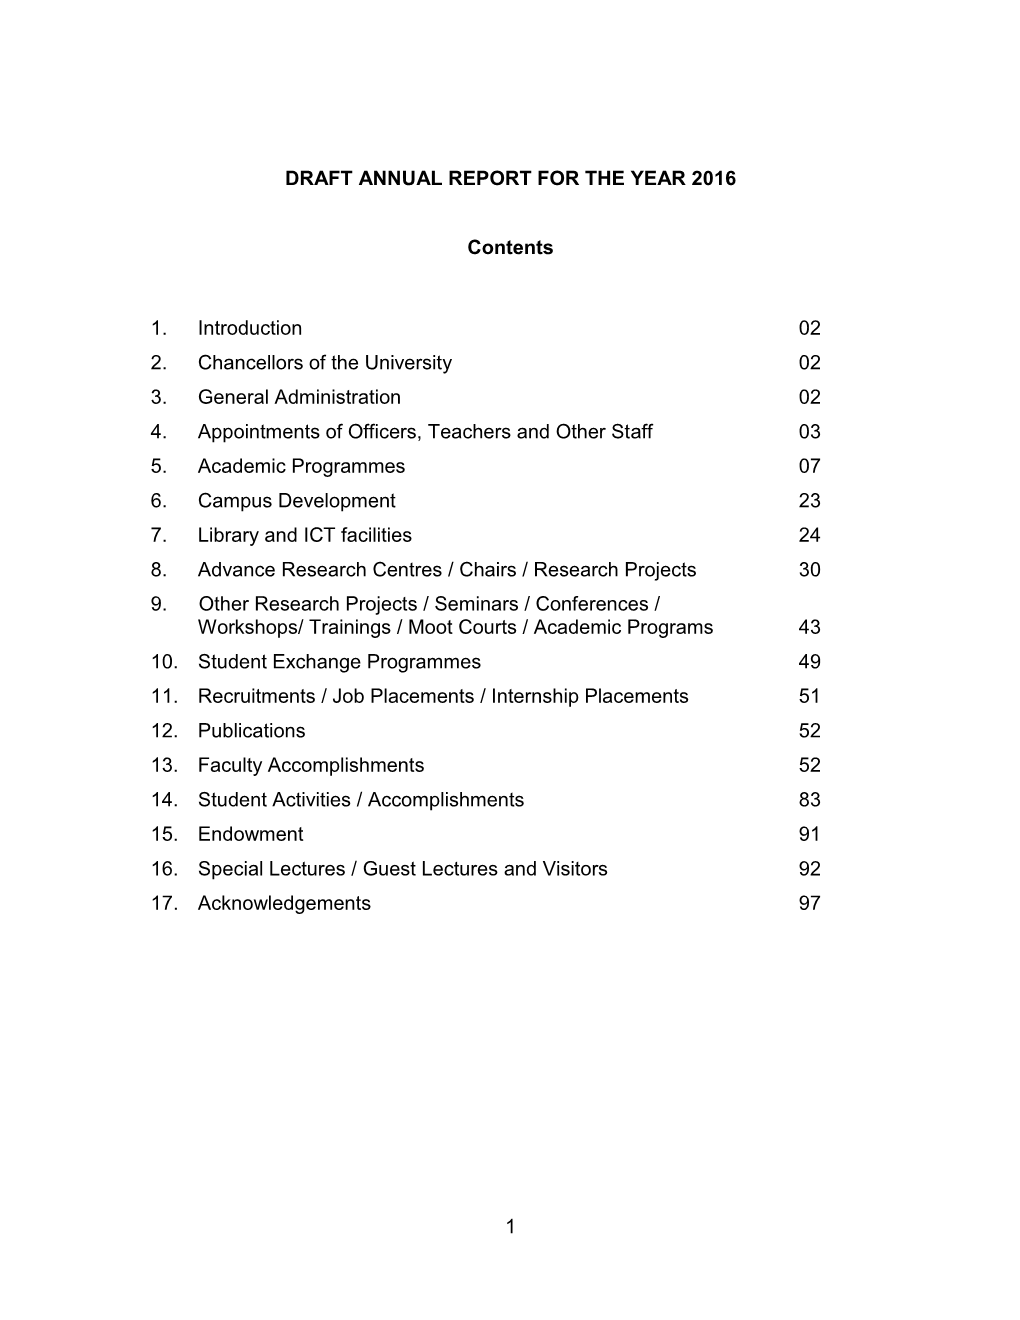 Draft Annual Report for the Year 2016